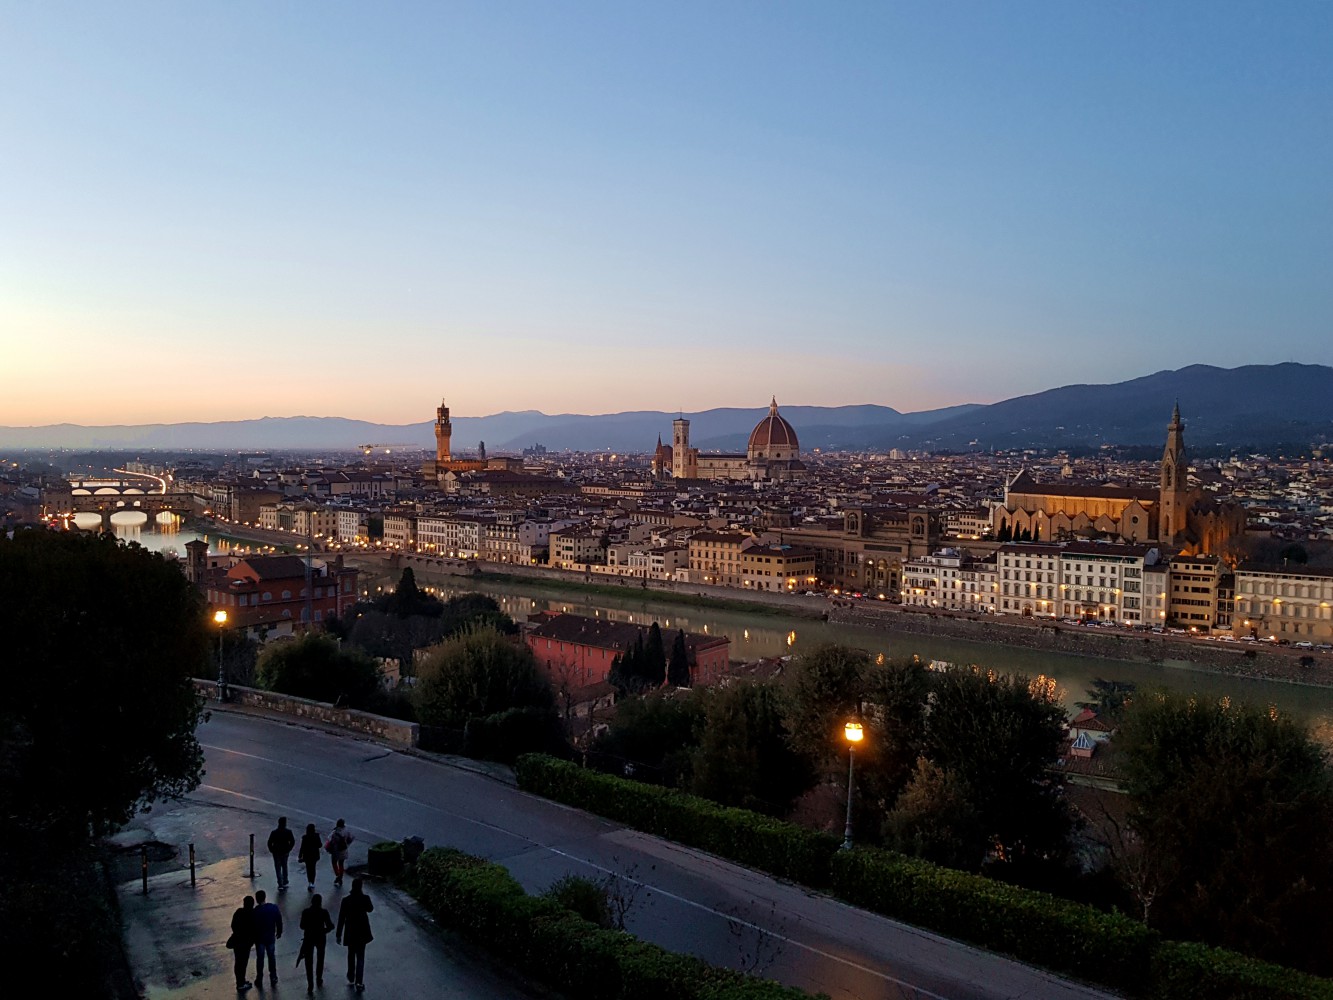 PIAZZALE MICHELANGELO AT SUNSET